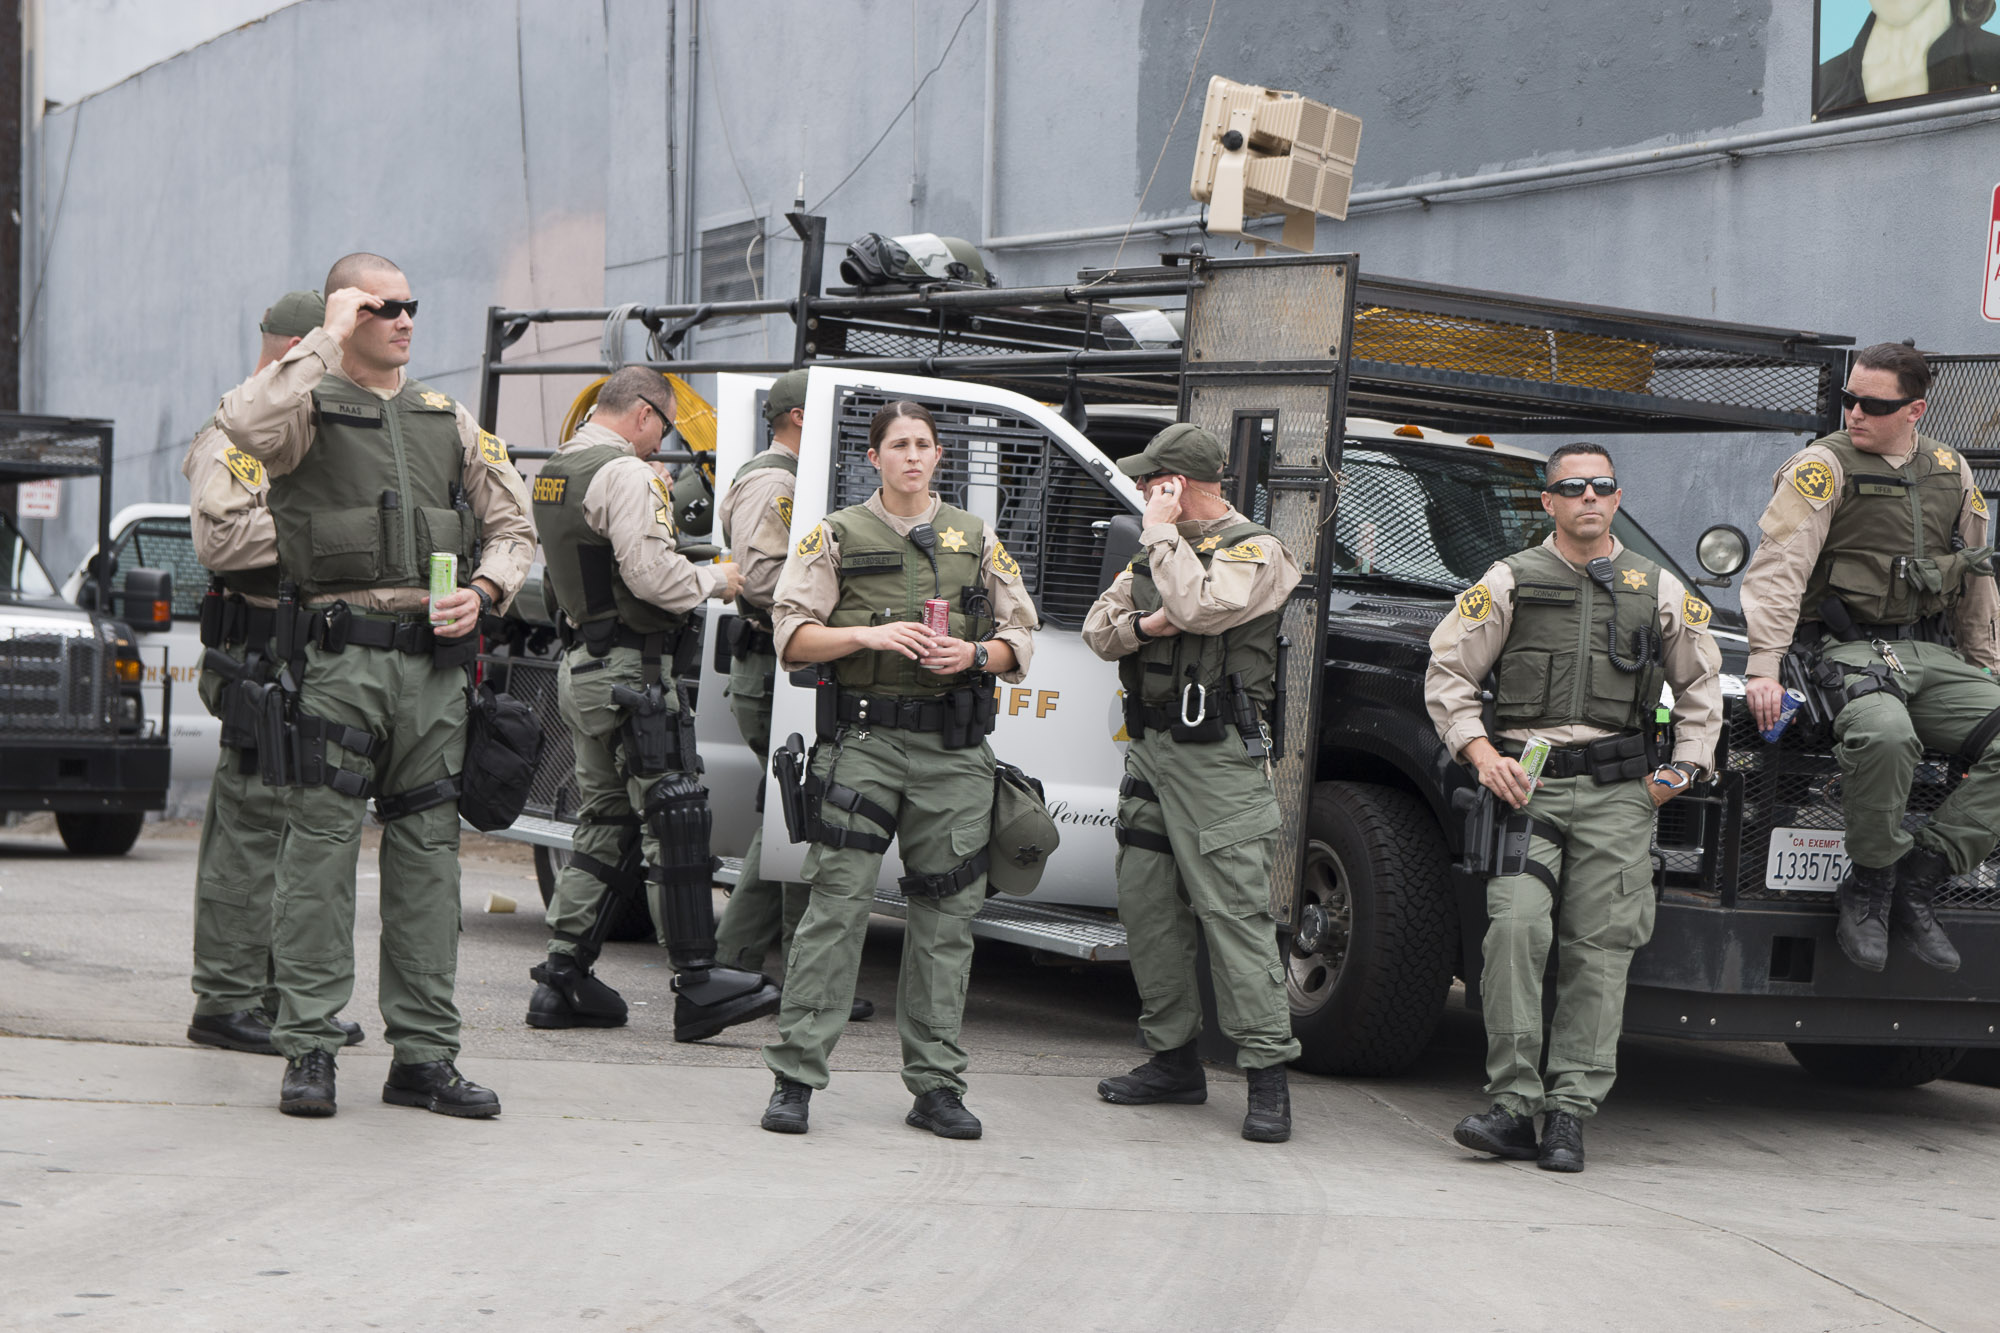 The L.A. County Sheriff's Department stepped up security for this year's Pride parade. (Photo by Derek Wear of Unikorn Photography)